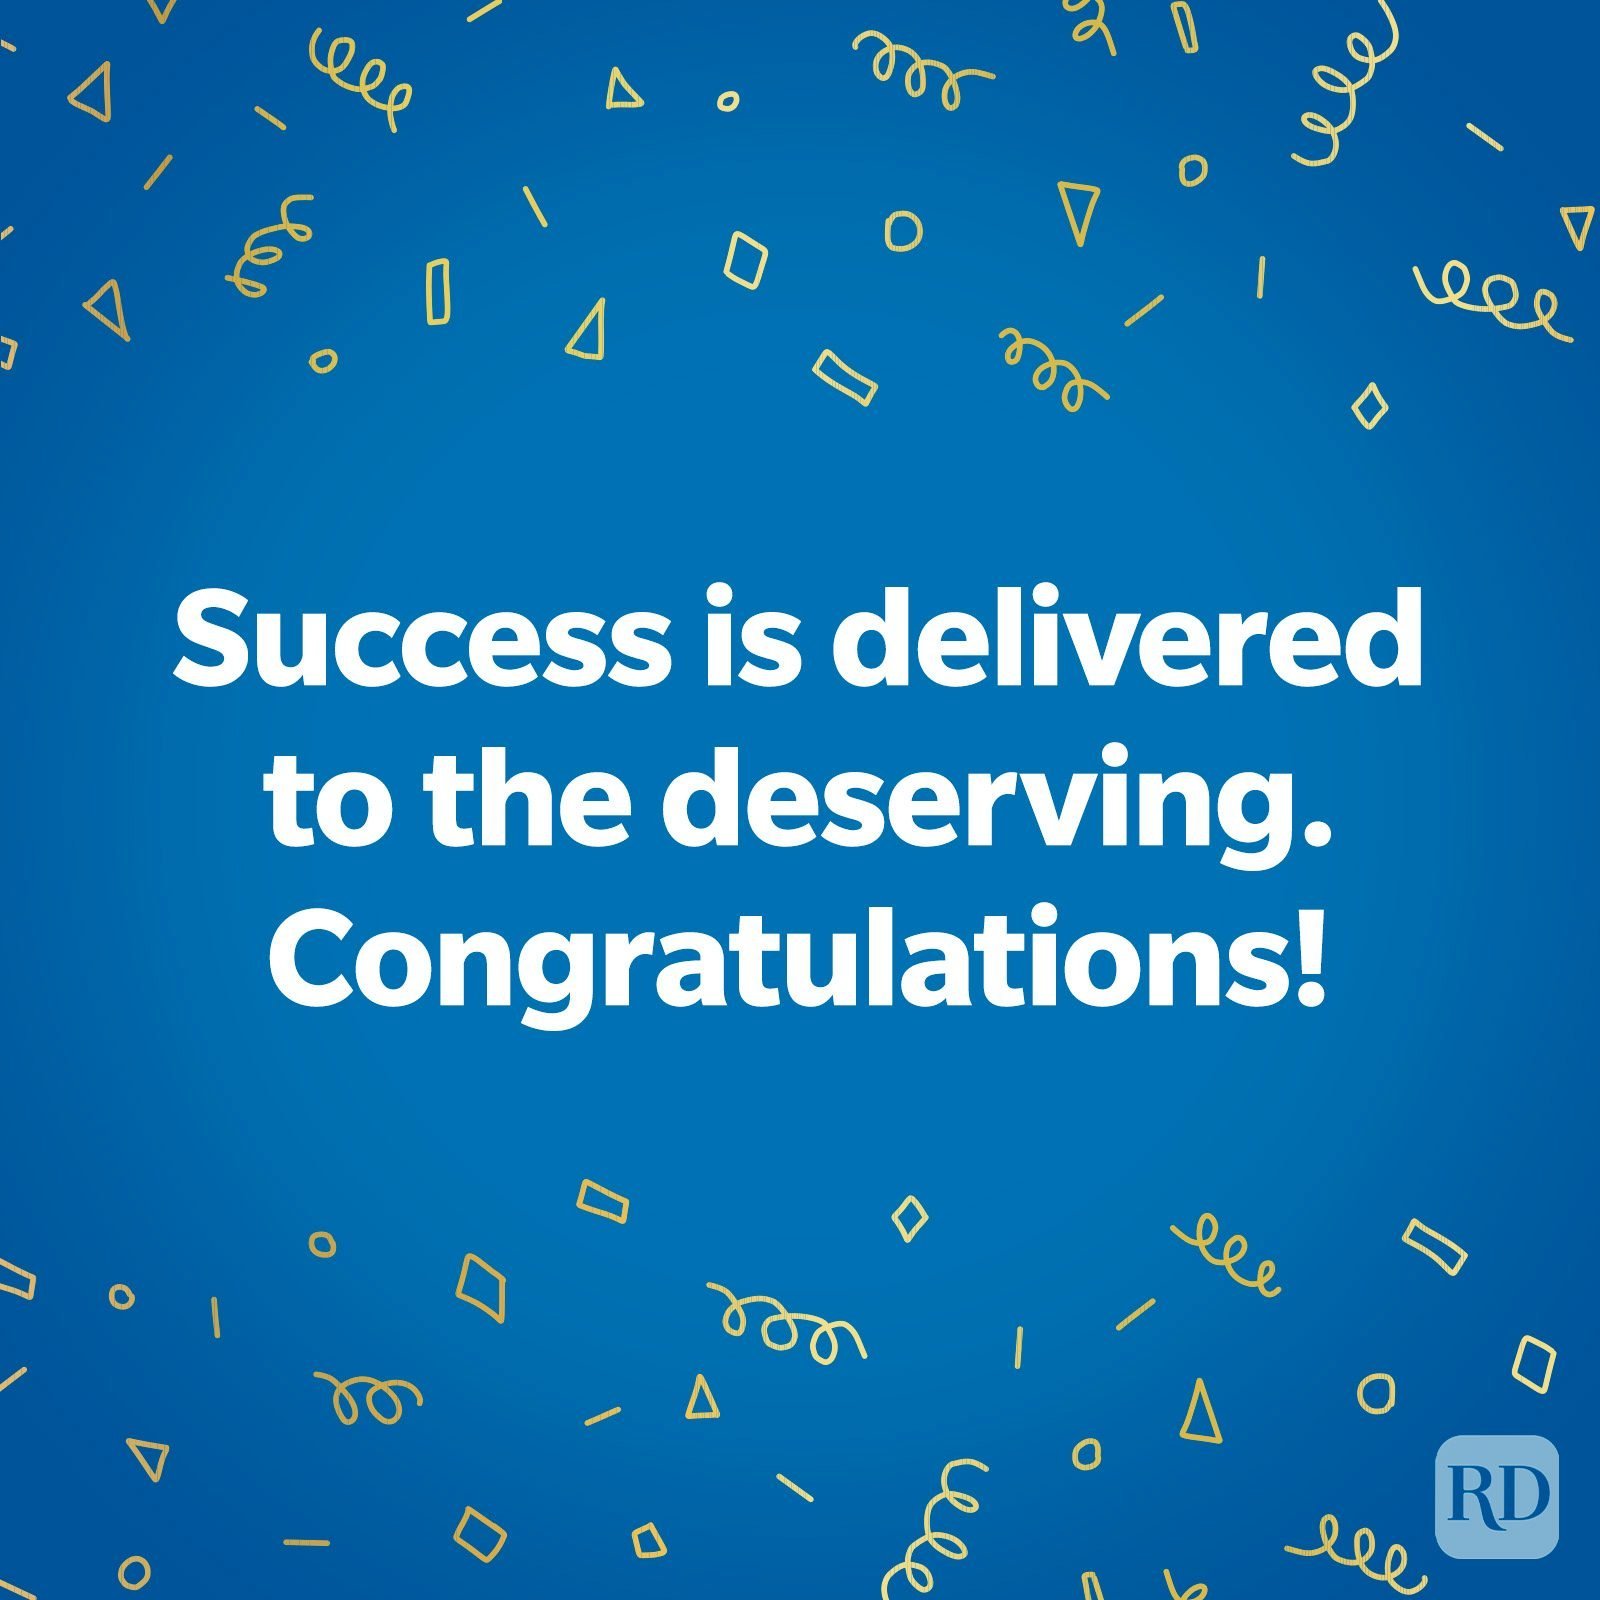 100 Congratulations Messages That Are Perfect for Any Occasion